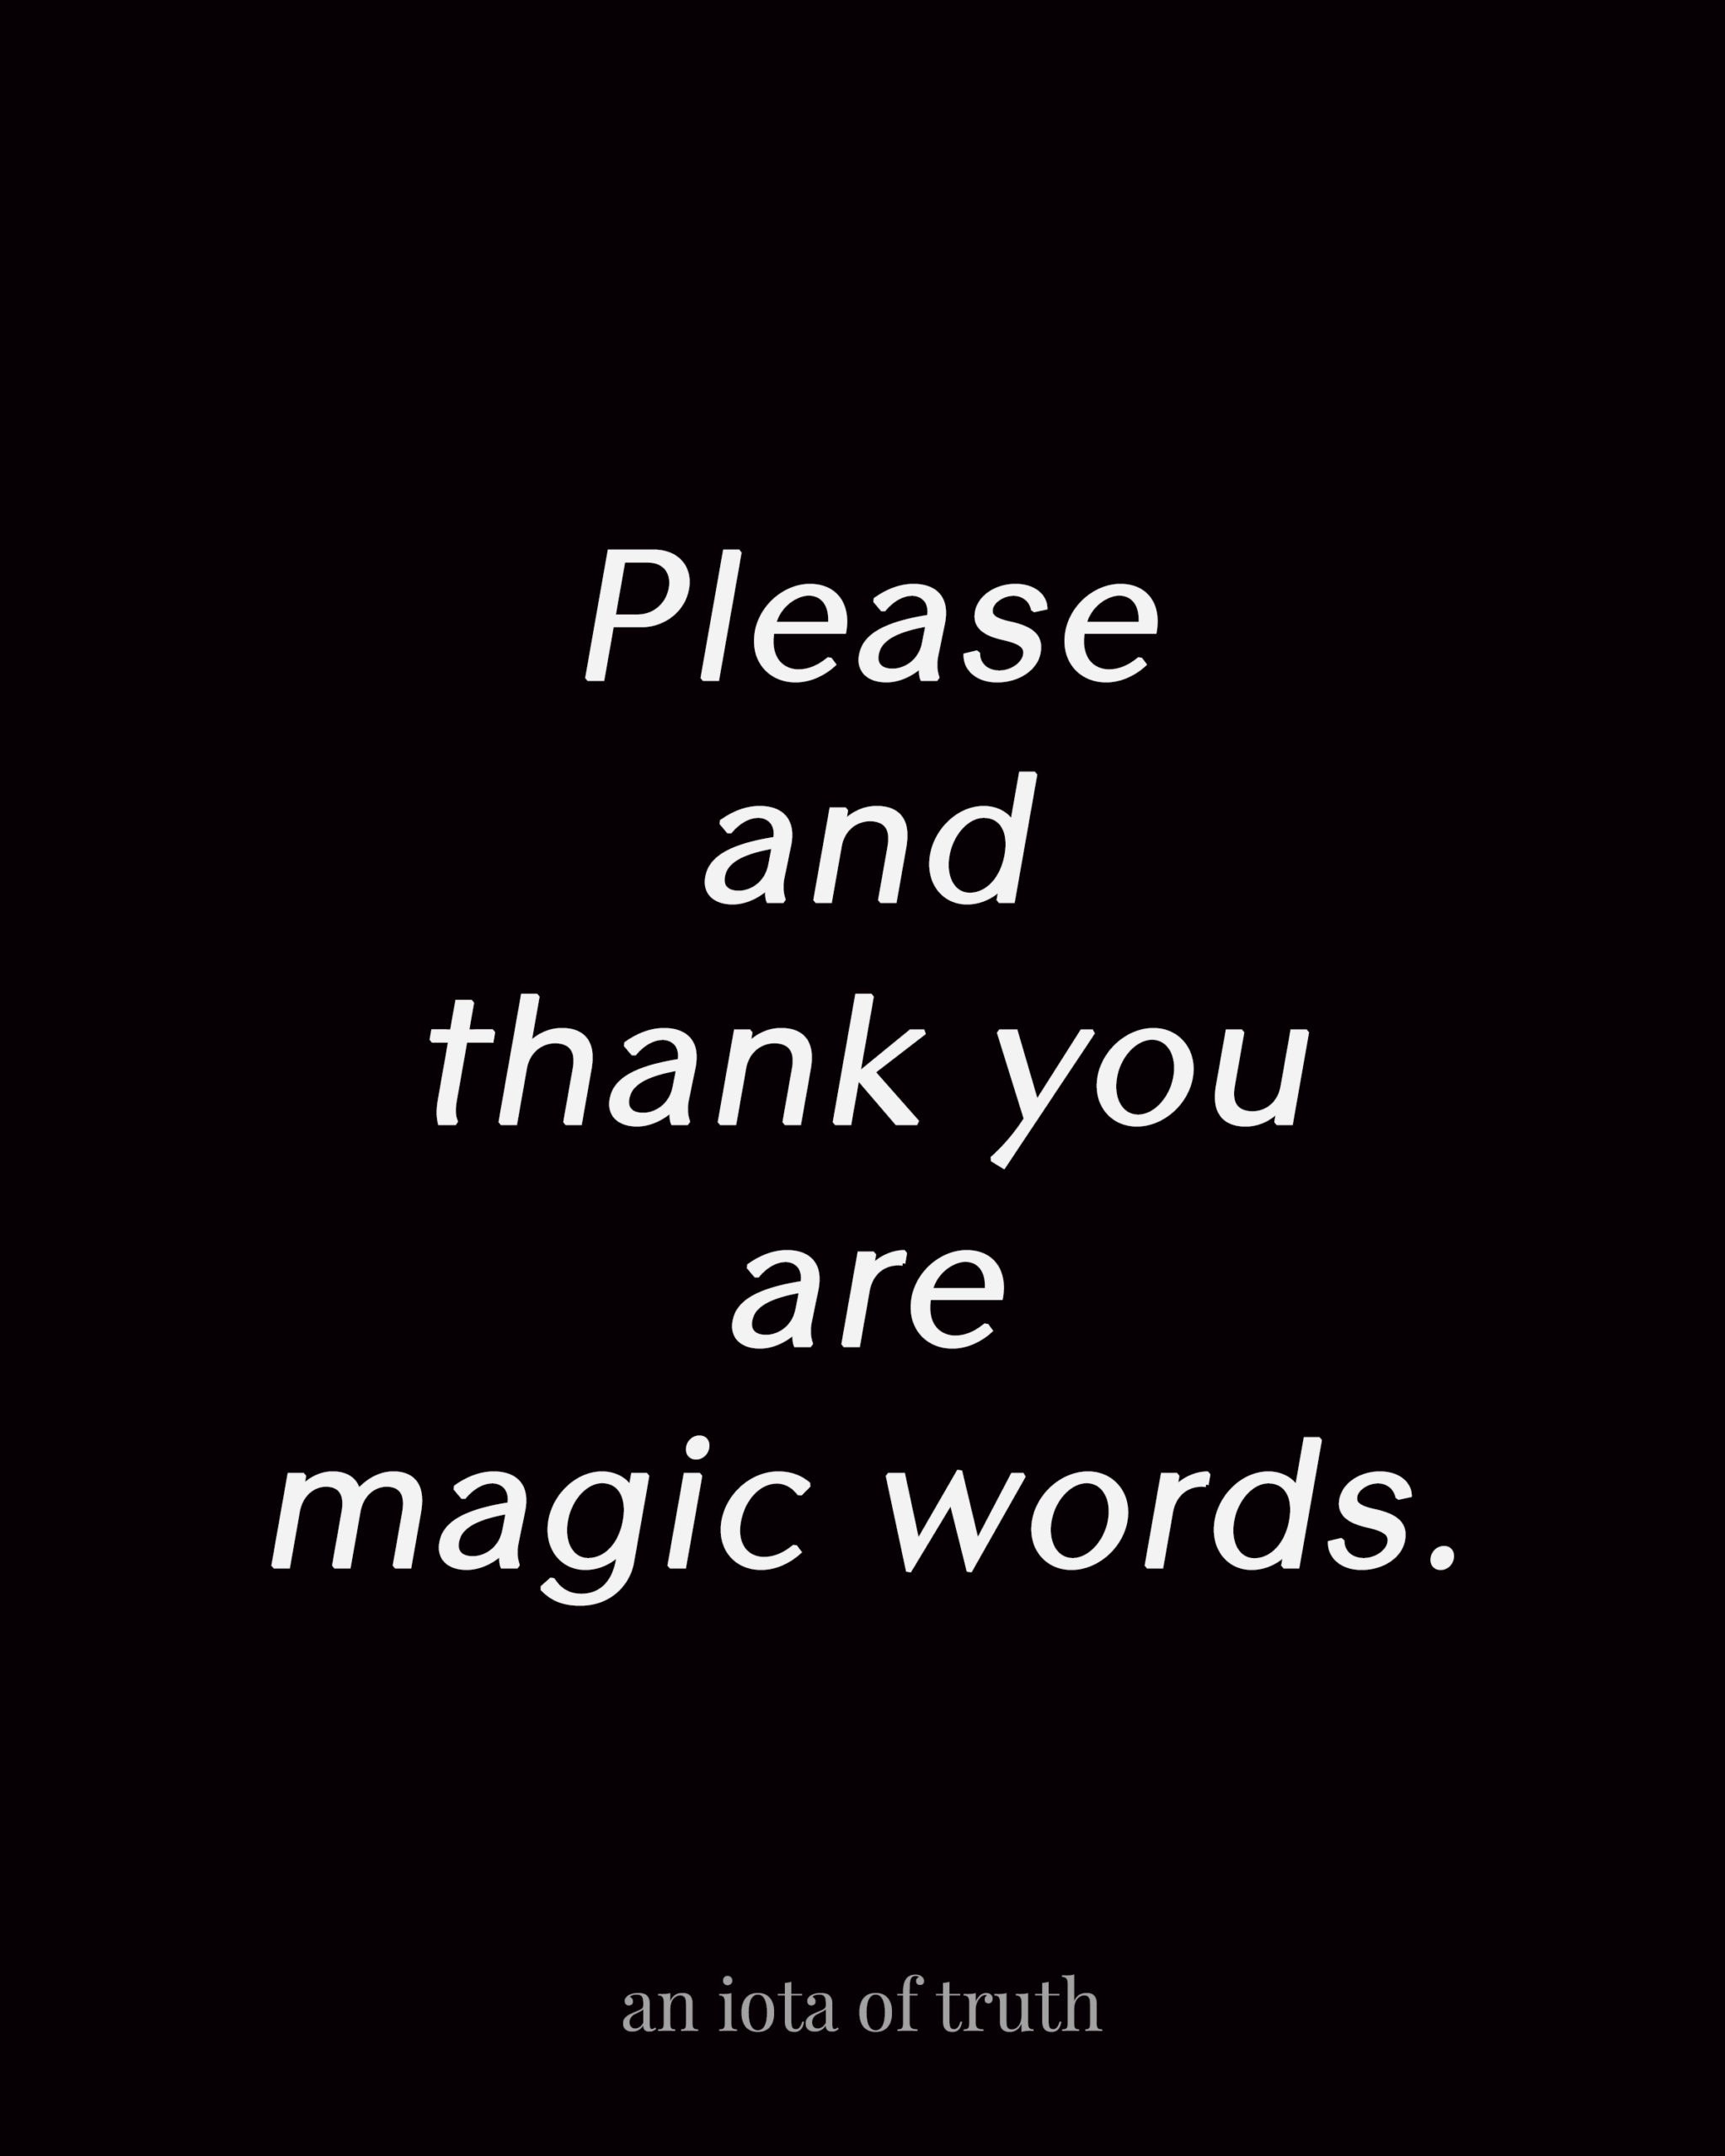 Please and thank you are magic words.